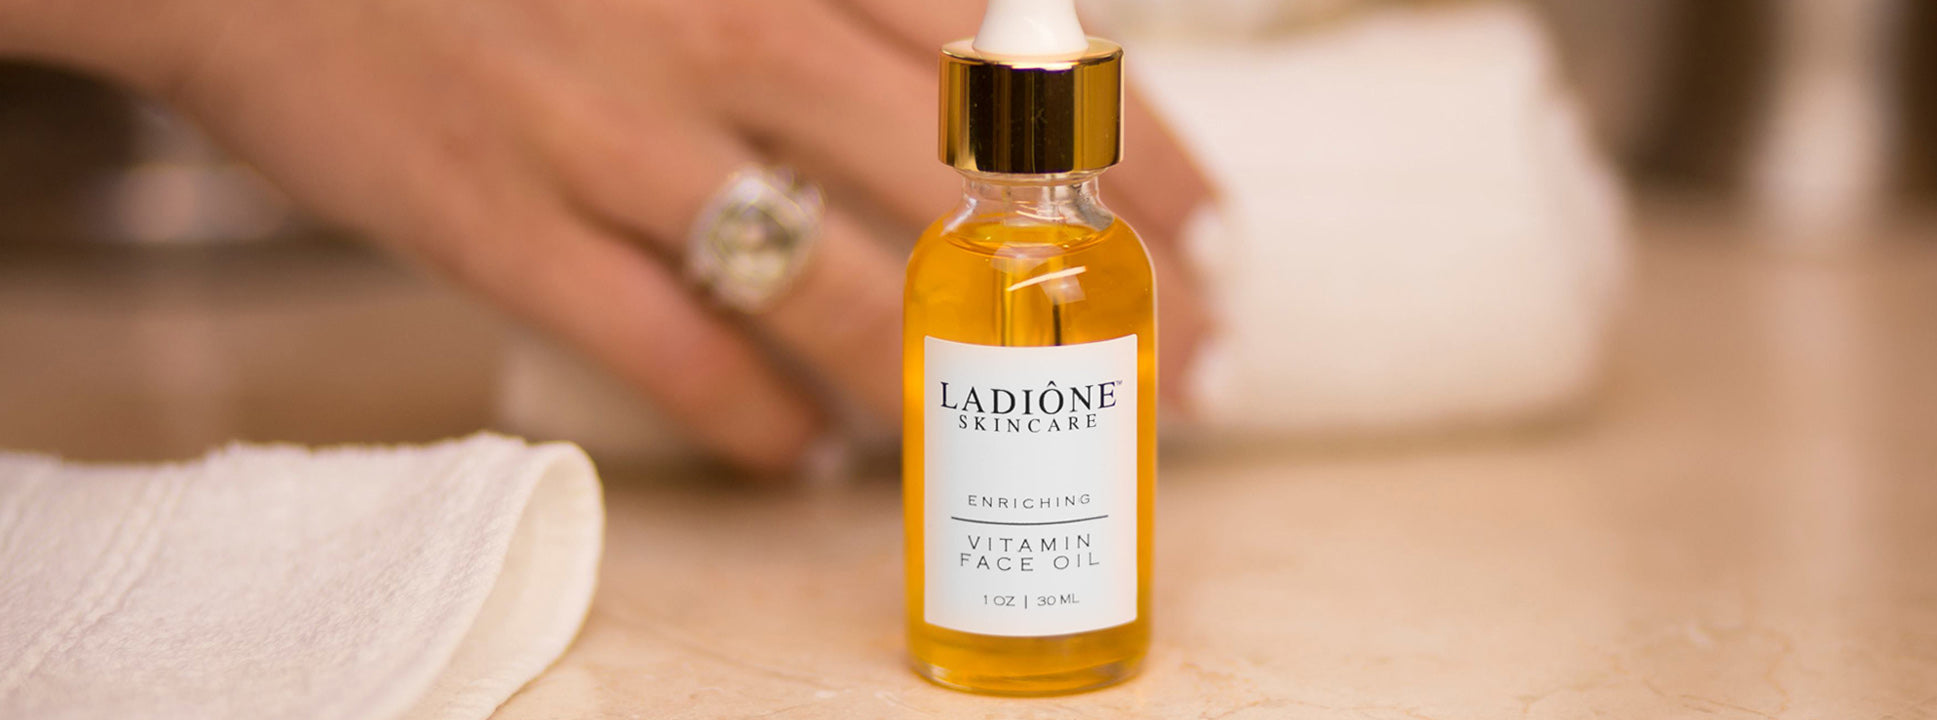 Ladione Enriching Daily Vitamin Face Oil